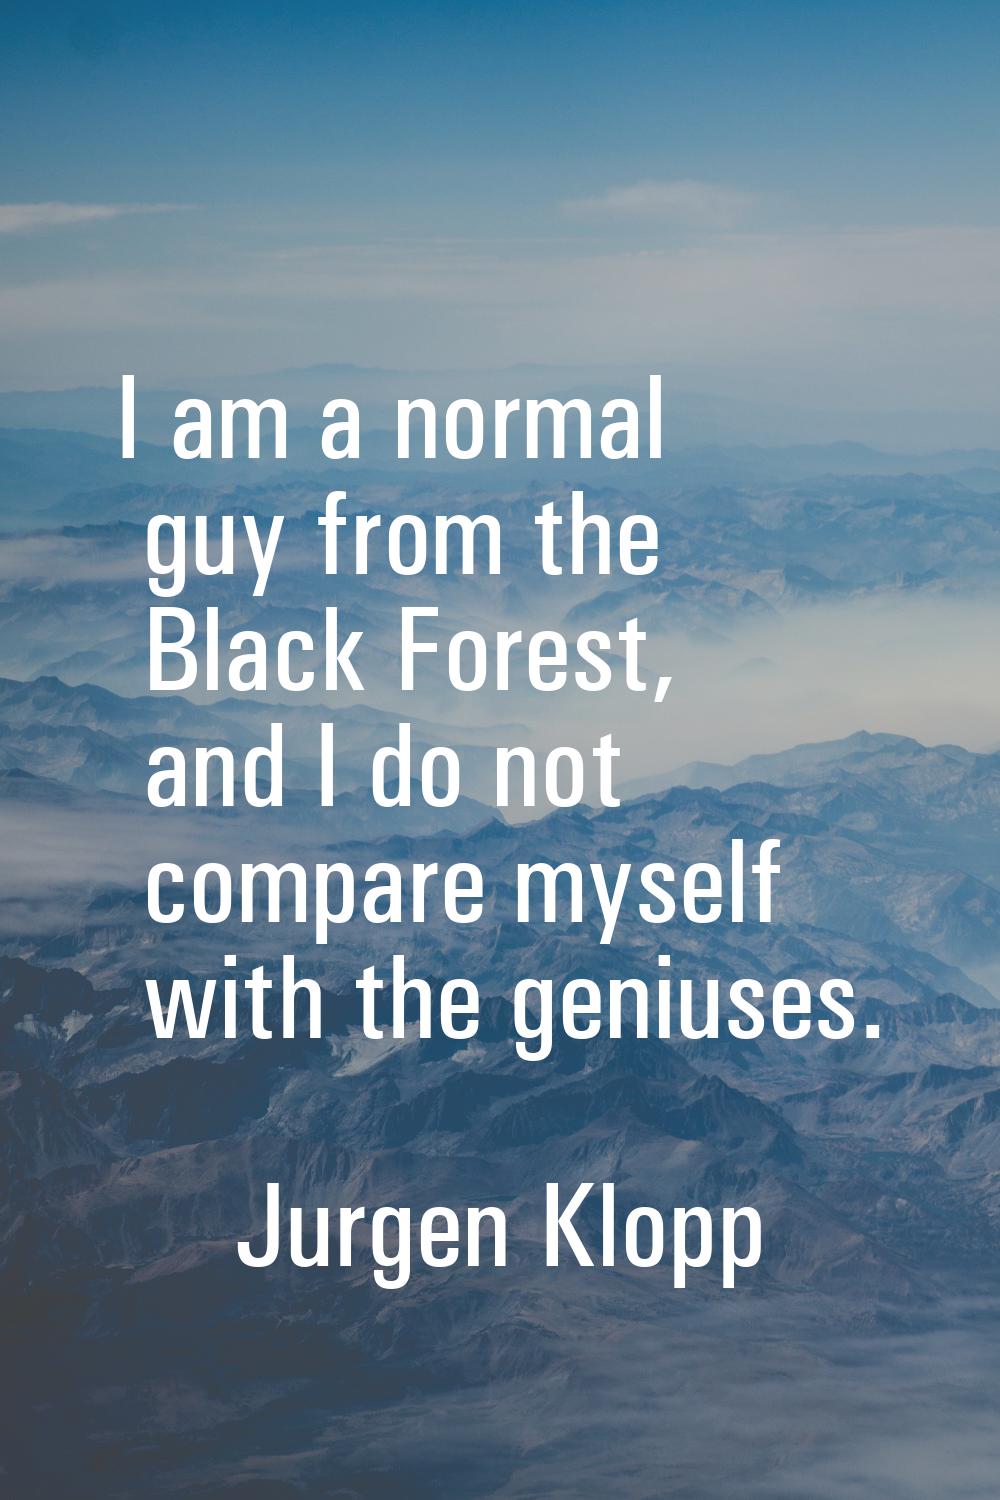 I am a normal guy from the Black Forest, and I do not compare myself with the geniuses.